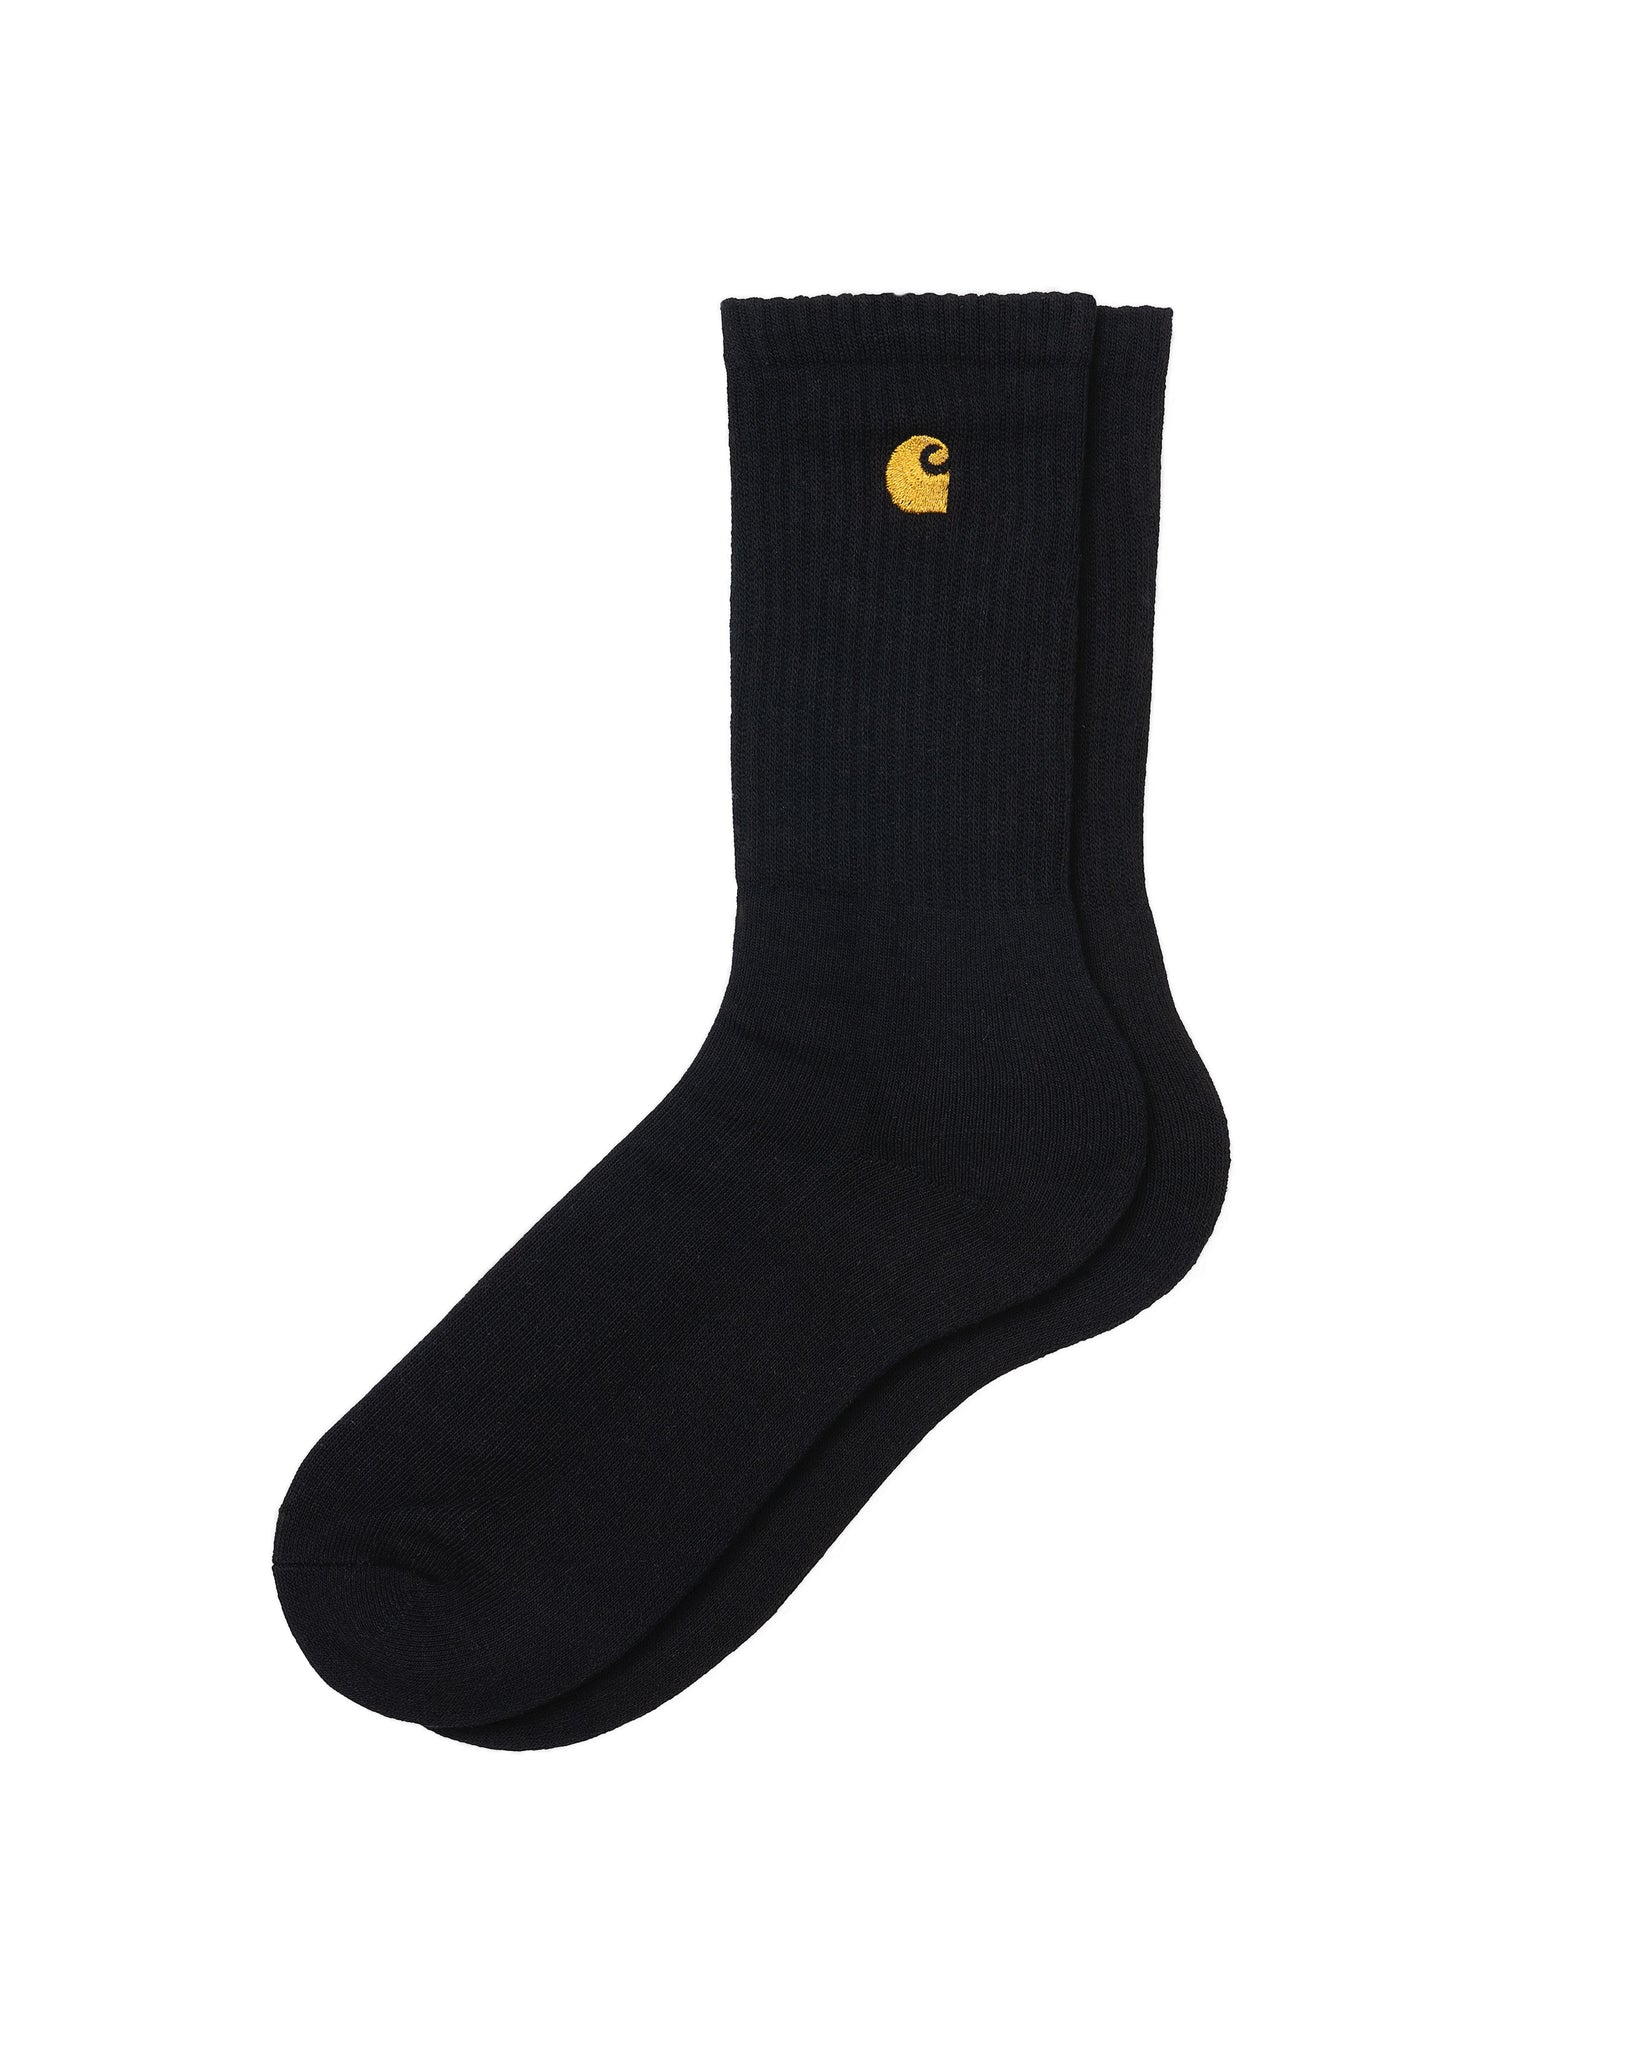 Chaussettes Chase - Noir/Or